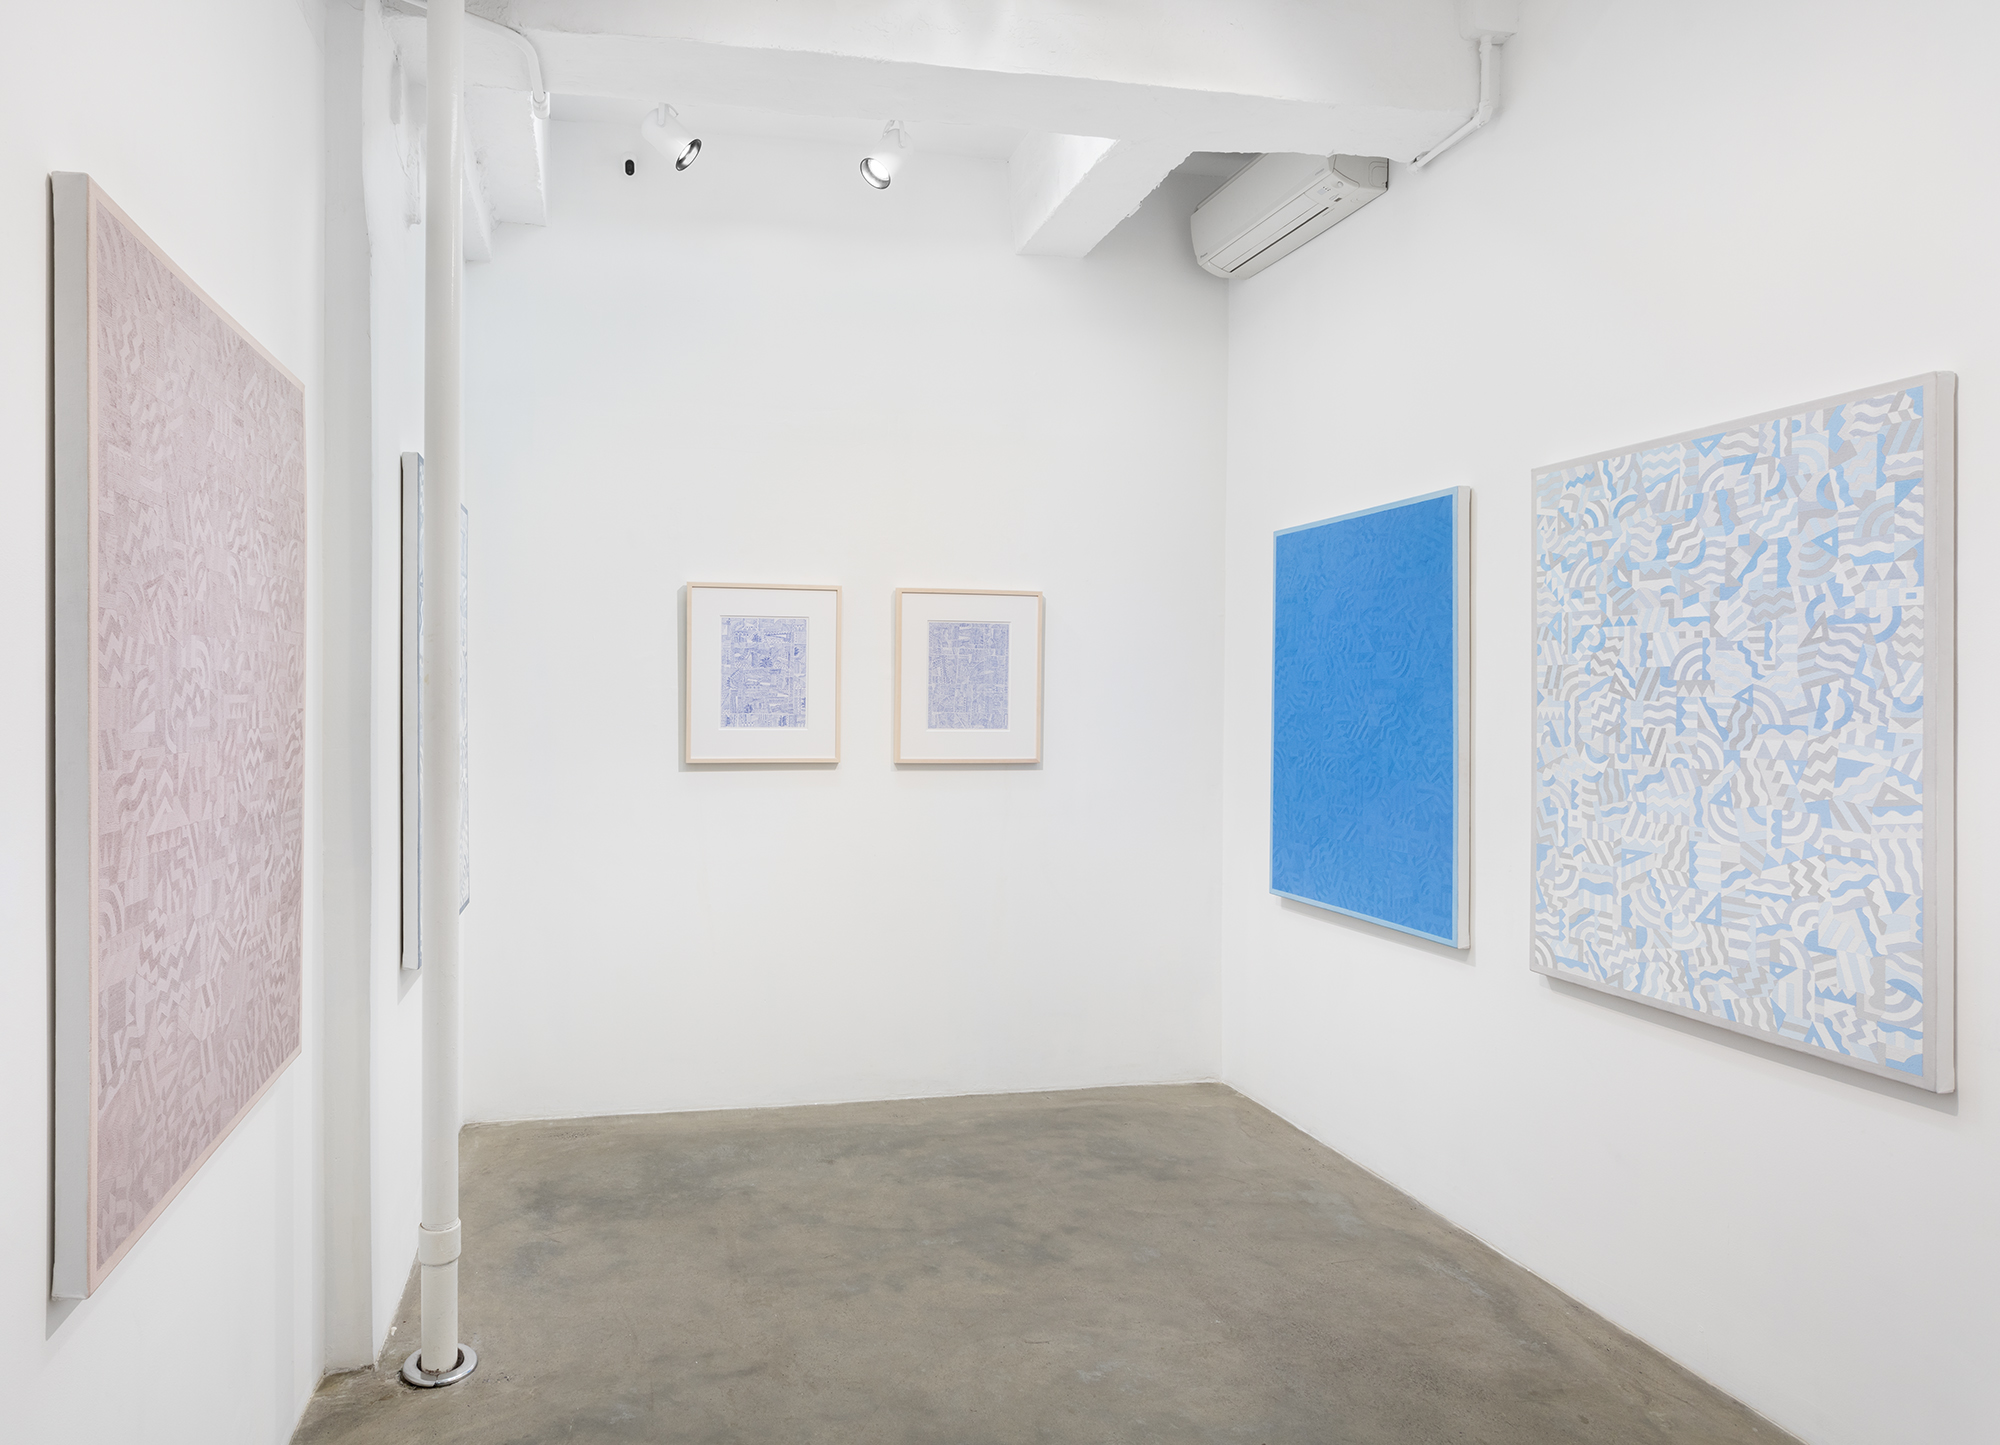 Installation view of Timothy Hull solo exhibition showing paintings on left and right walls and two works on paper on the back wall of the gallery